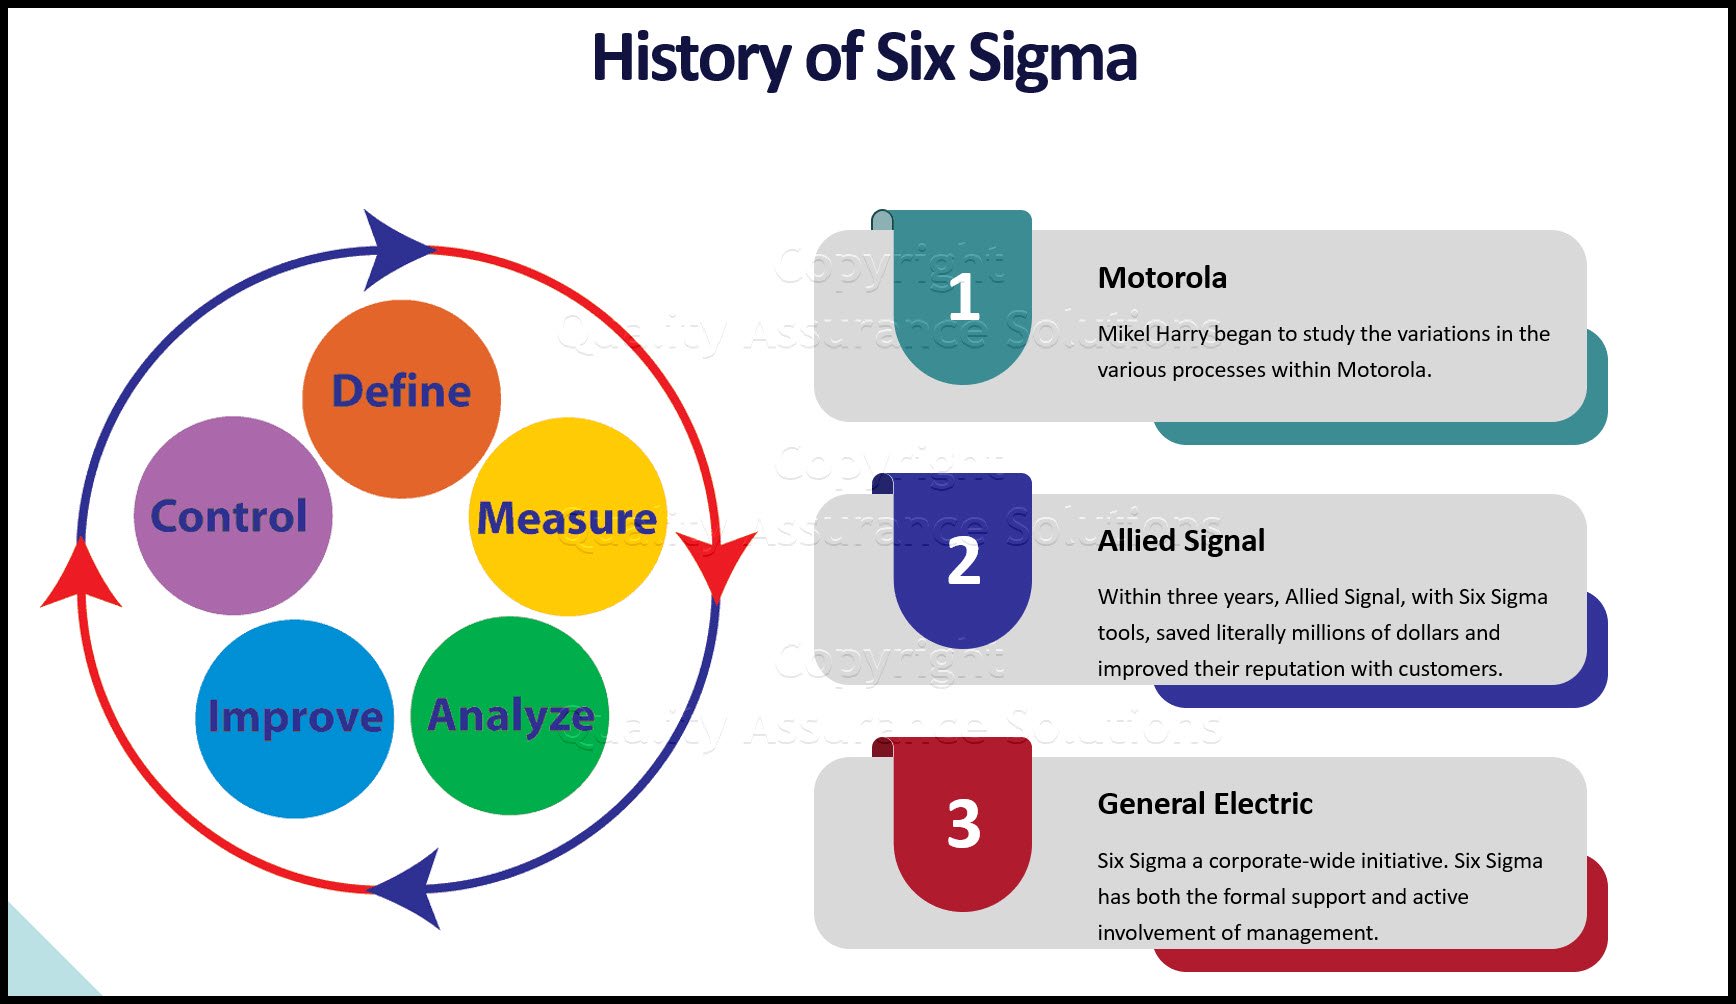 History of Six Sigma : Started at Motorola but popularized in the 1990s by AlliedSignal and General Electric.